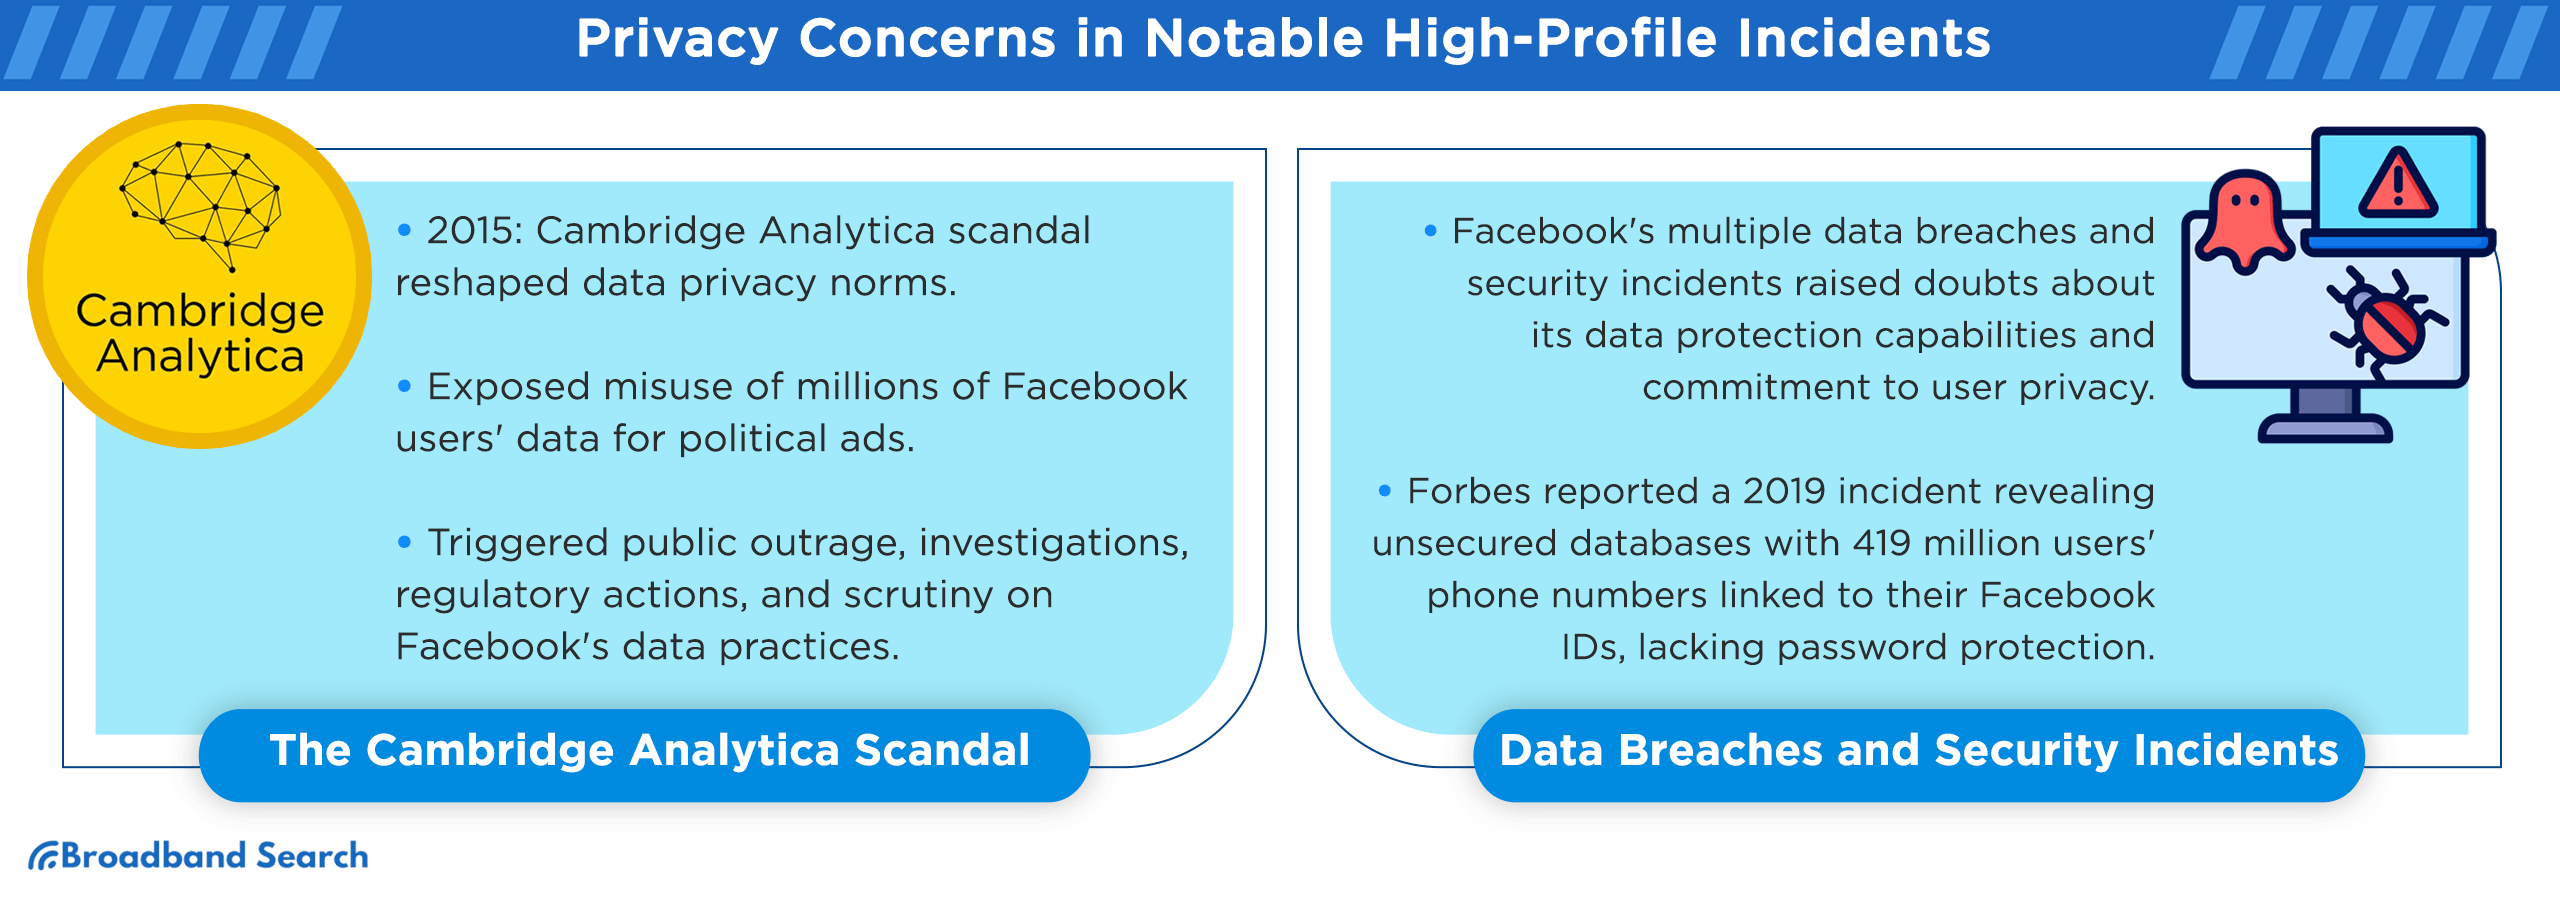 Privacy conerns surrounding Facebook and examples of notable high profile incidents